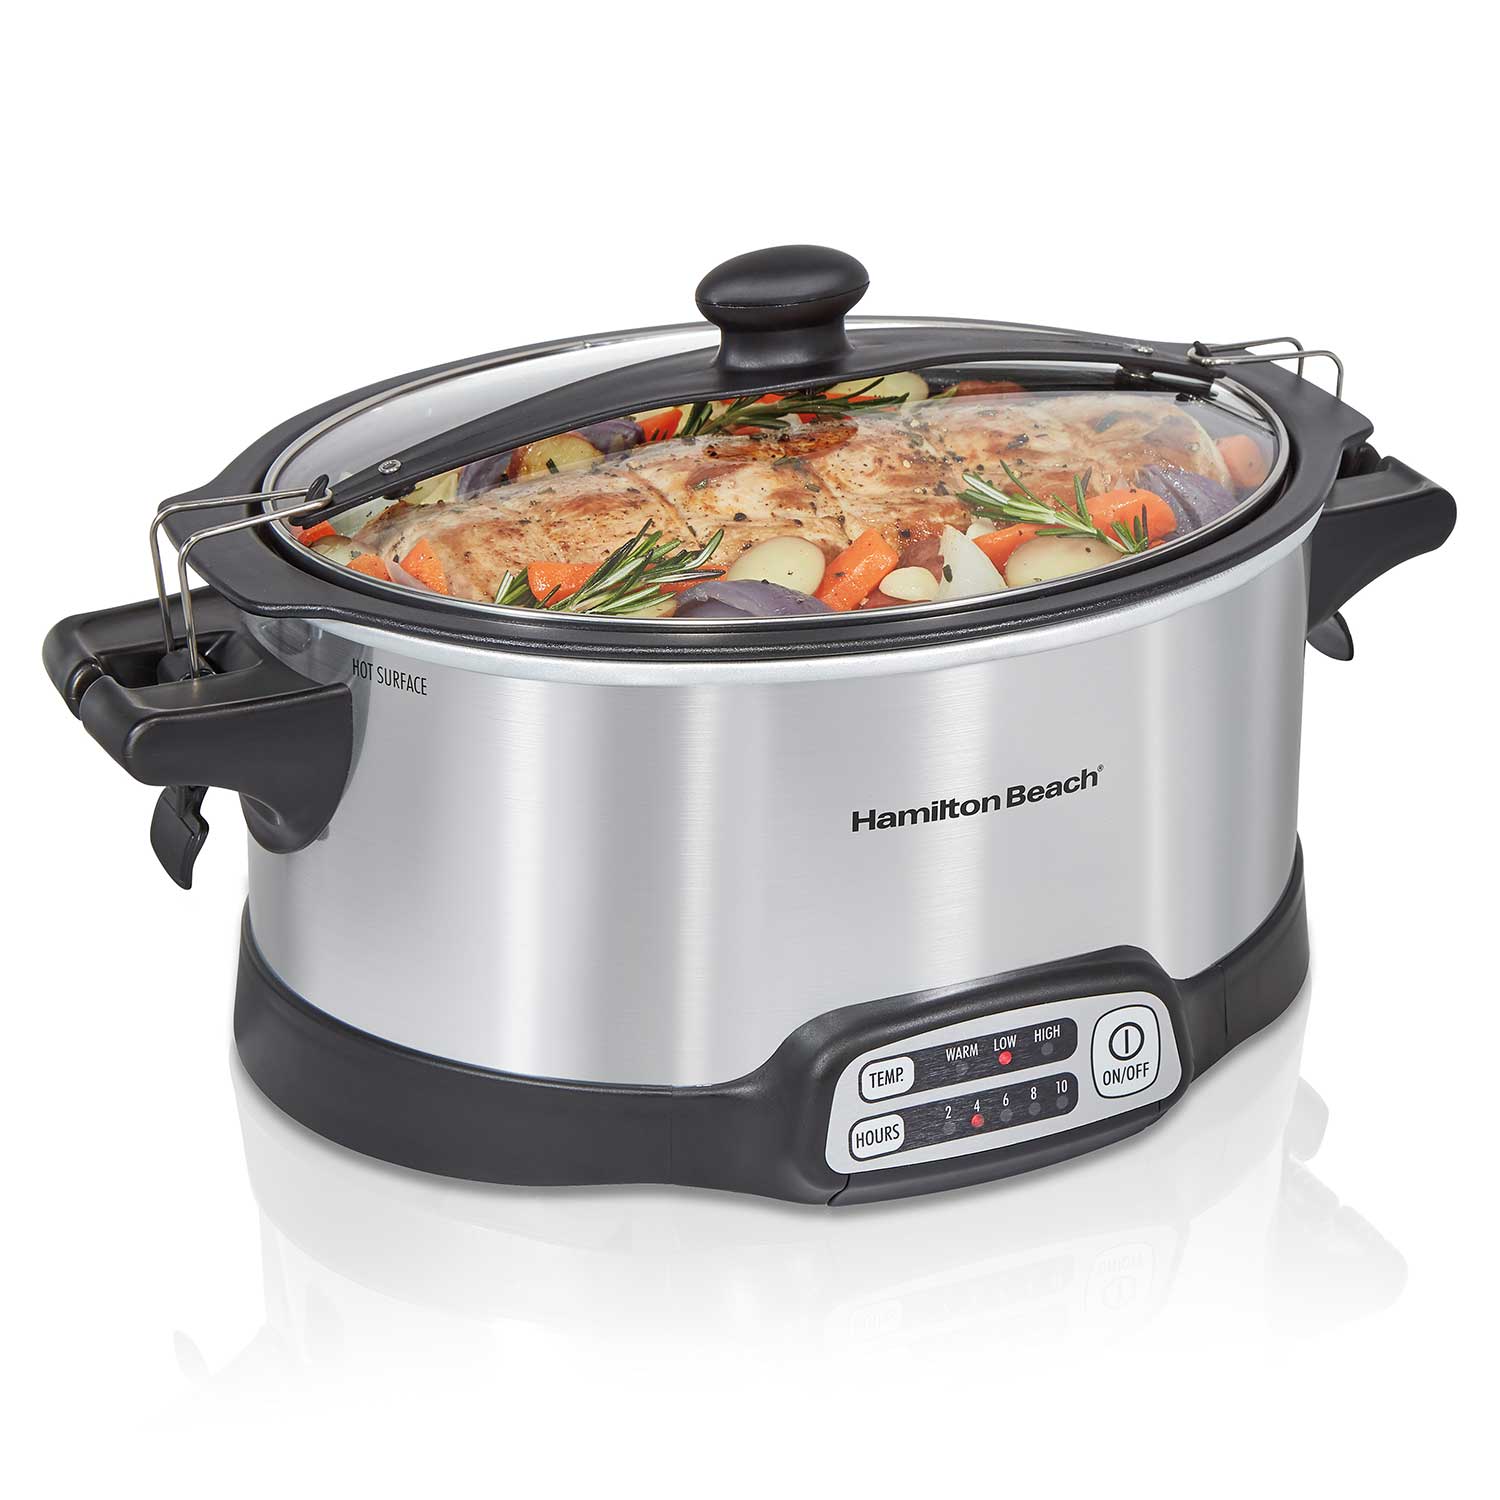 Stay or Go® Sear & Cook 6 Quart Slow Cooker Silver, (33663)